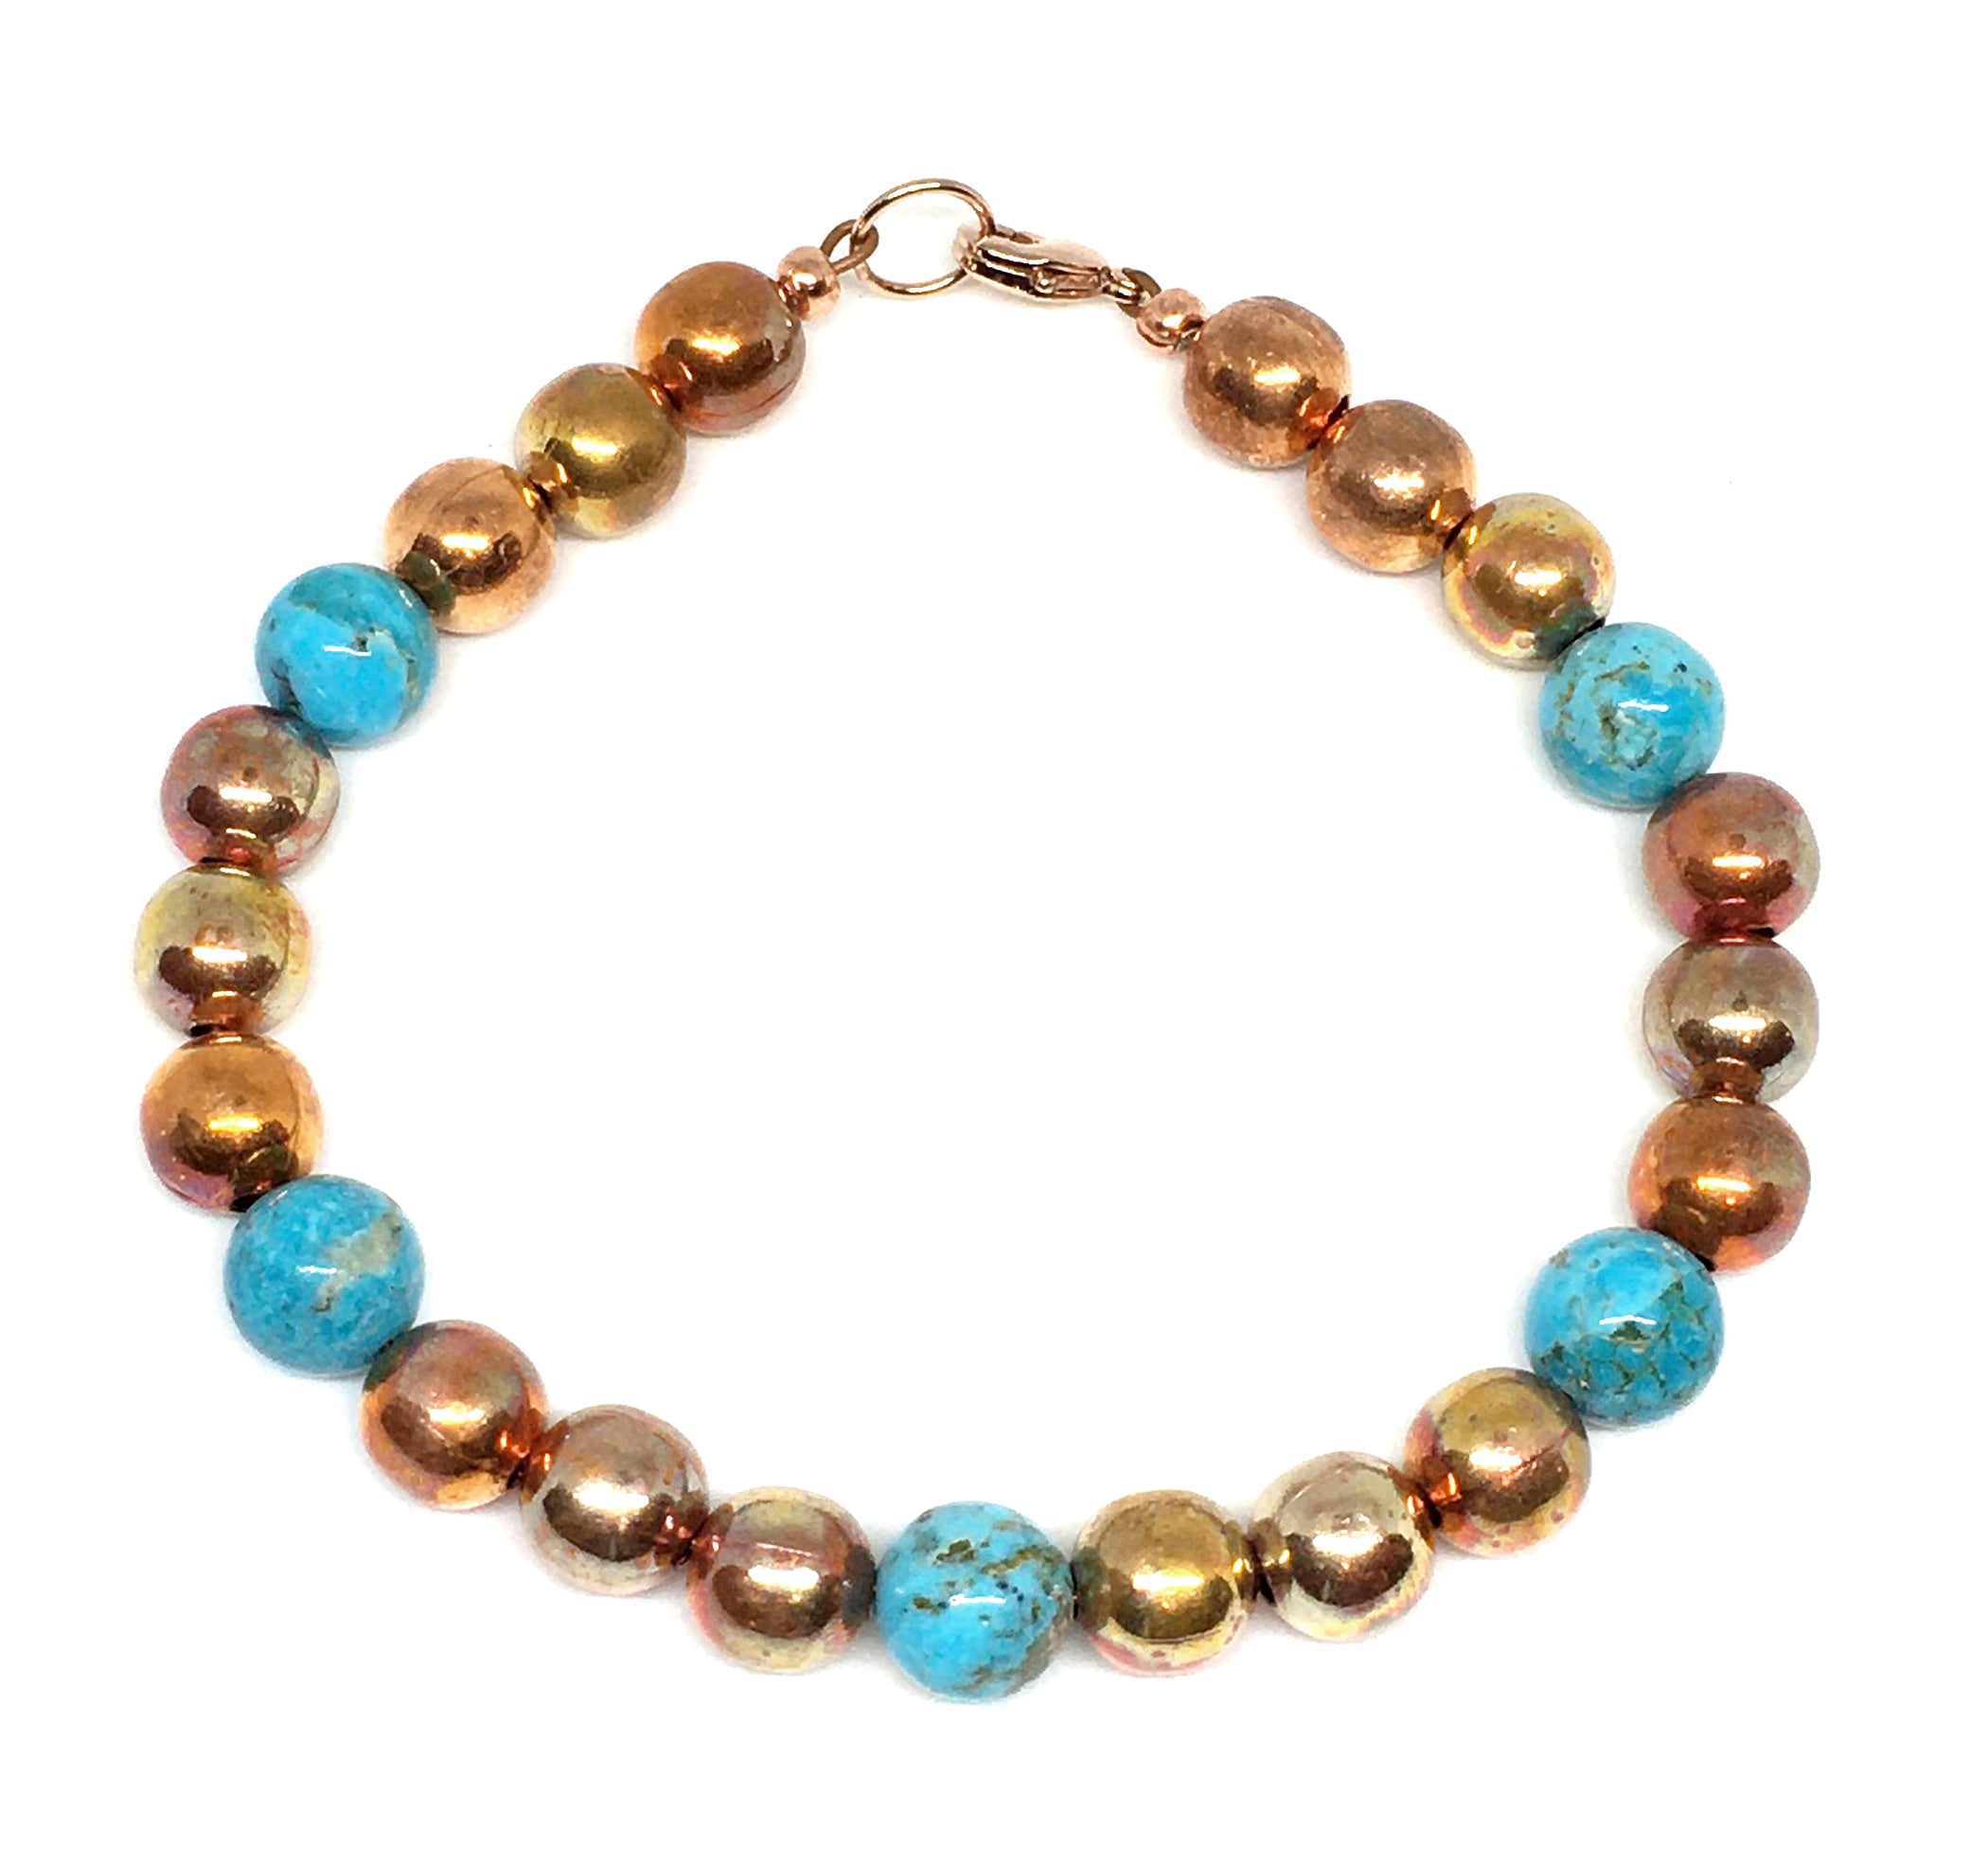 Kingman Turquoise and Flame Painted Copper Bead Bracelet - Sonoran Sunset Collection